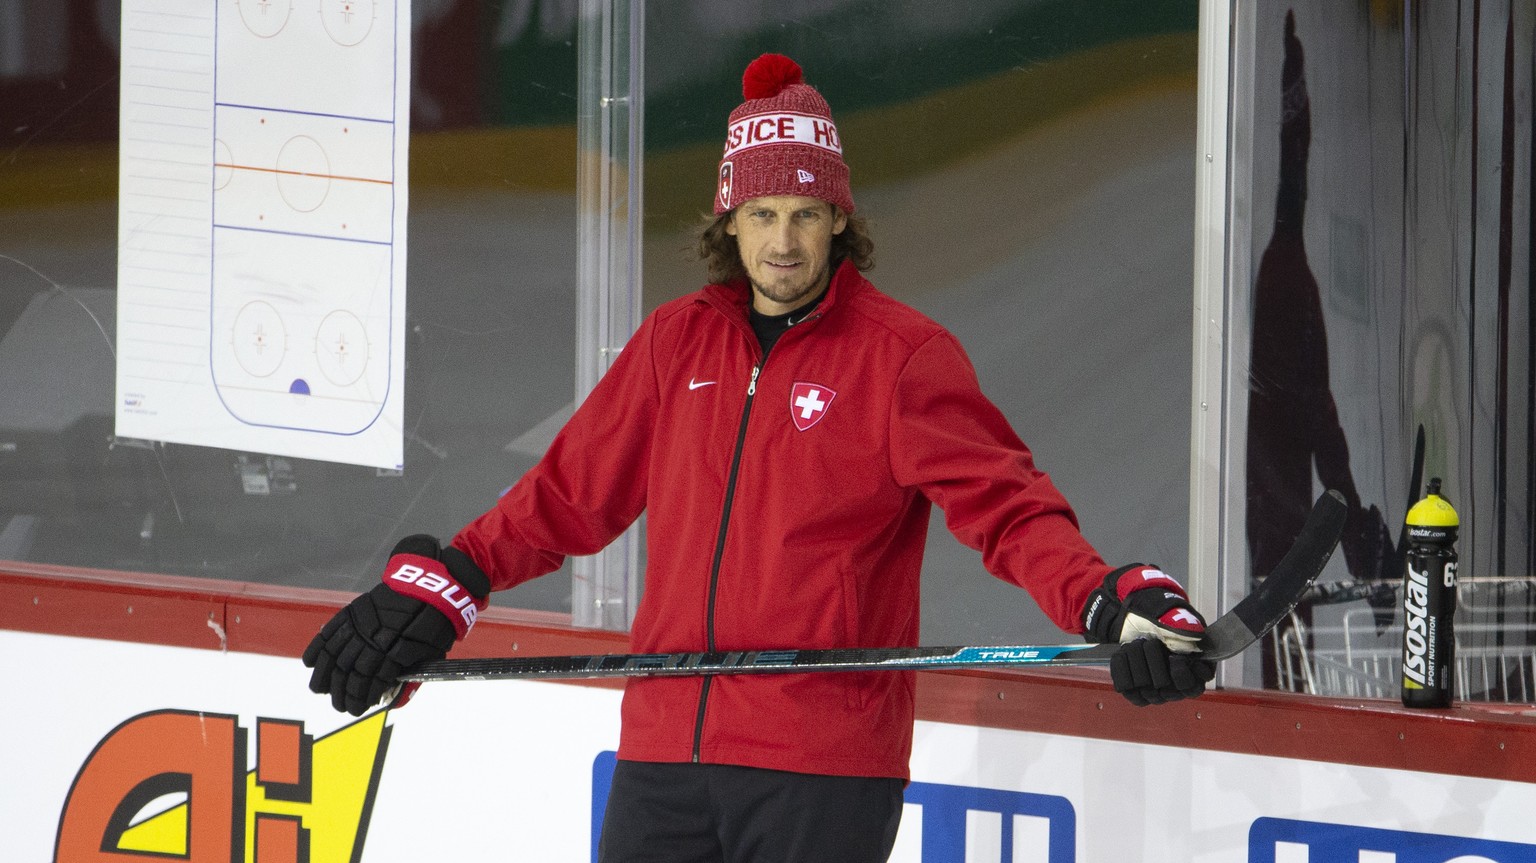 Patrick Fischer, head coach of Switzerland national ice hockey team, looks his players, during a Switzerland training session, at the IIHF 2021 World Championship, at the Olympic Sports Center, in Rig ...